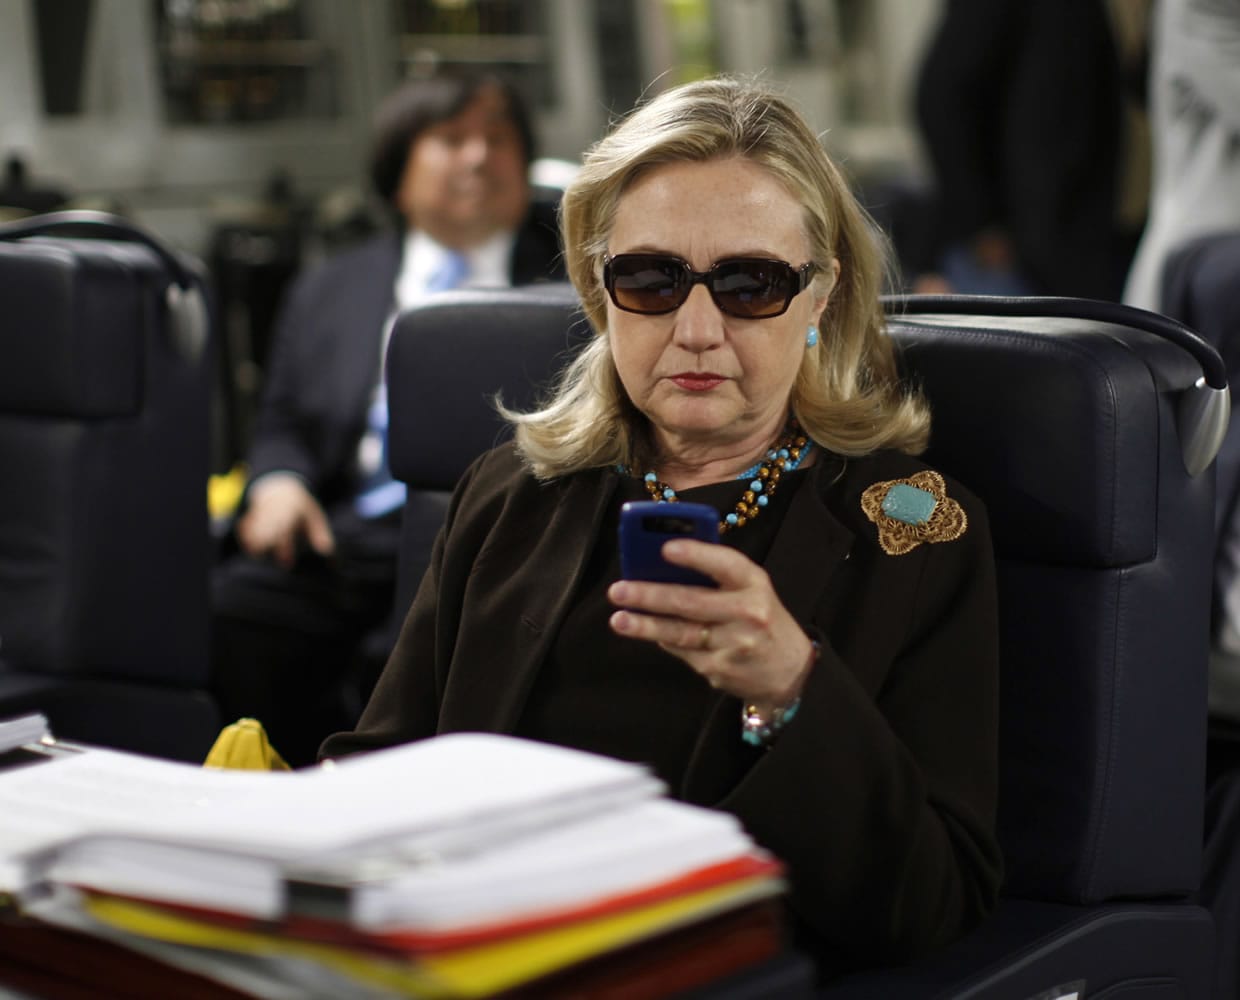 Then-Secretary of State Hillary Rodham Clinton checks her Blackberry in 2011 from a desk inside a C-17 military plane upon her departure from Malta, in the Mediterranean Sea, bound for Tripoli, Libya.